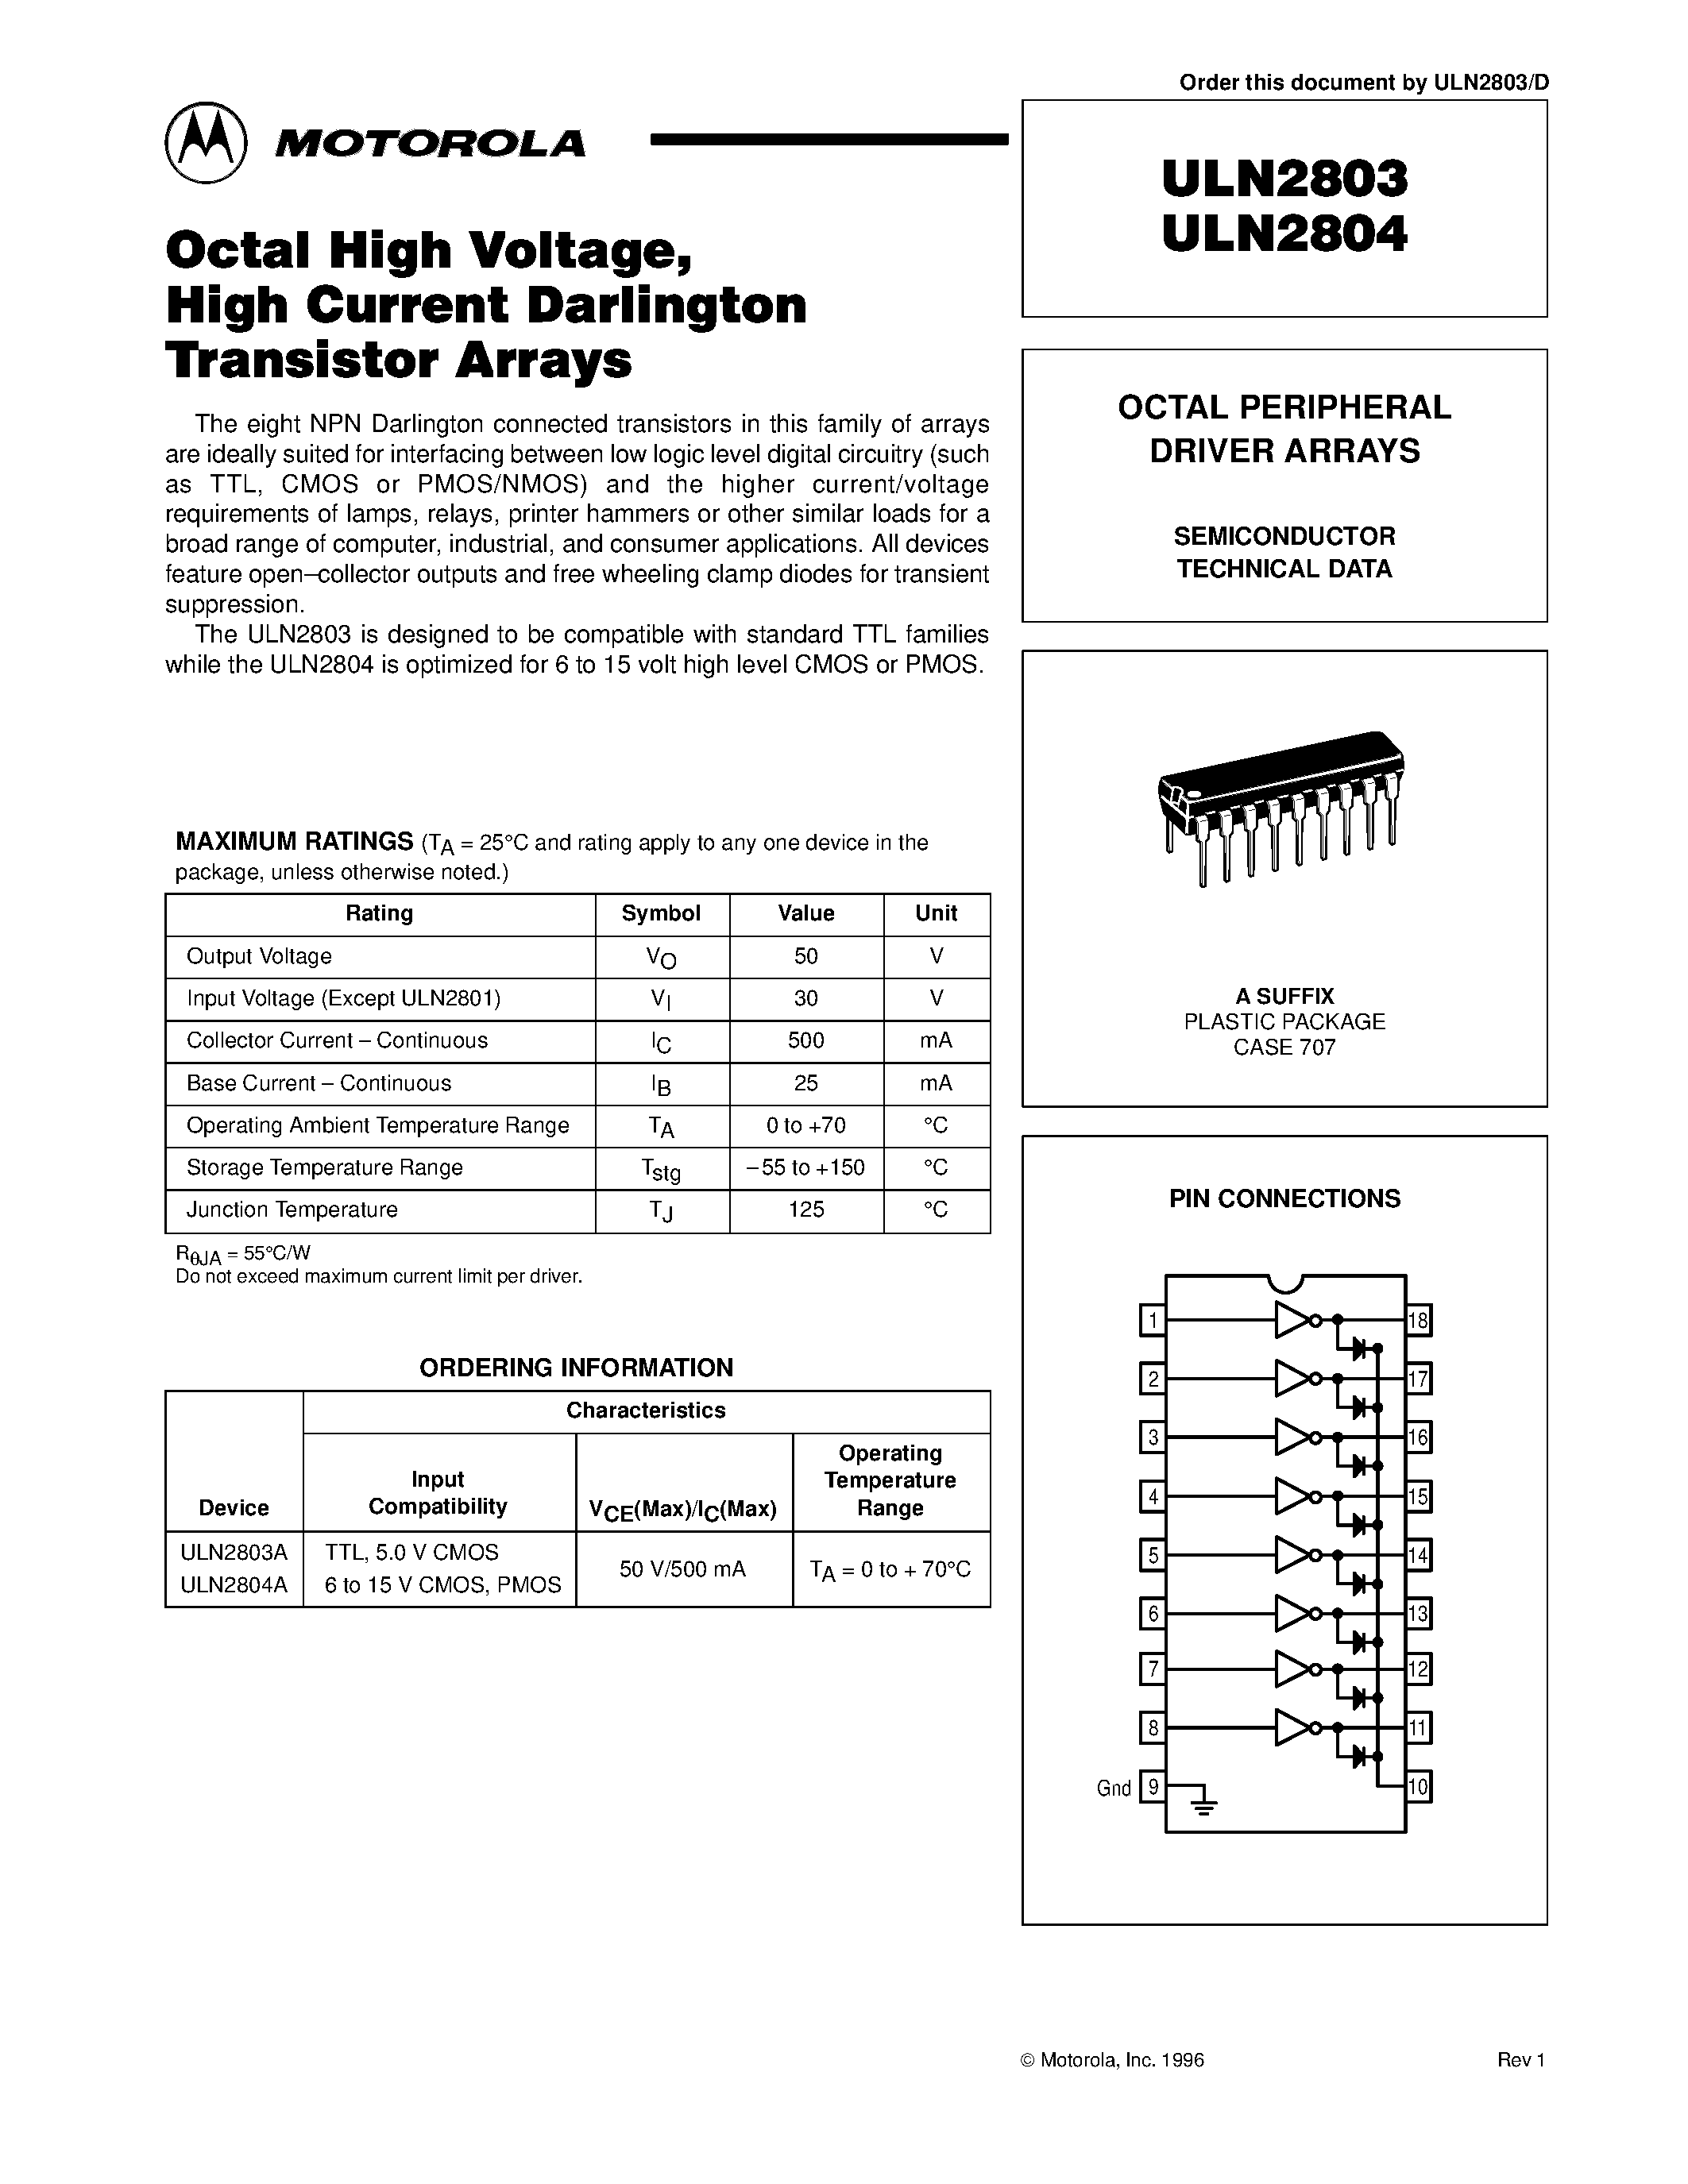 Datasheet ULN2803 - OCTAL PERIPHERAL DRIVER ARRAYS page 1